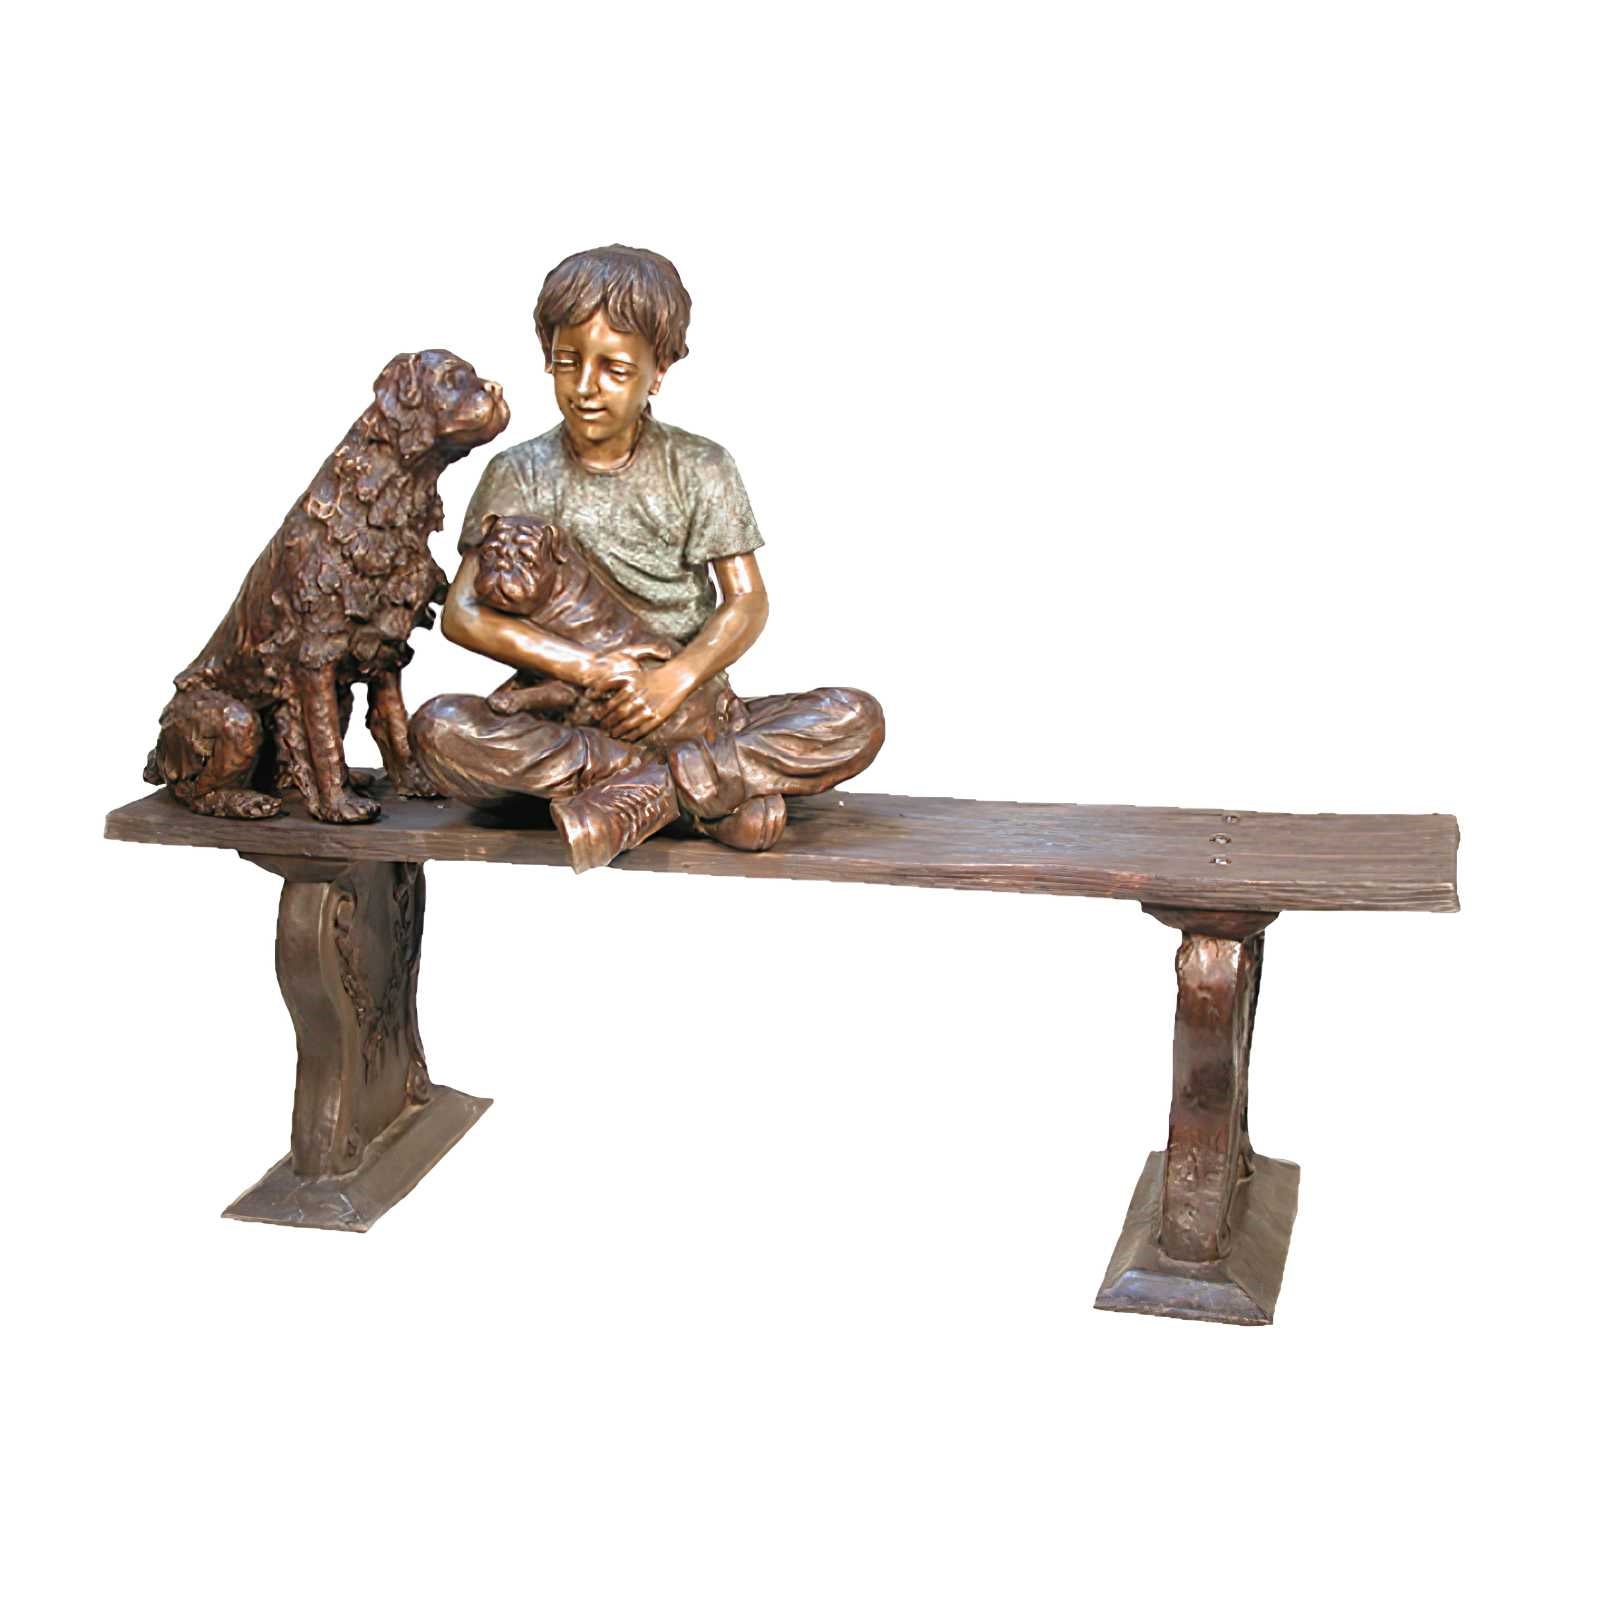 Child on Bench with Dogs